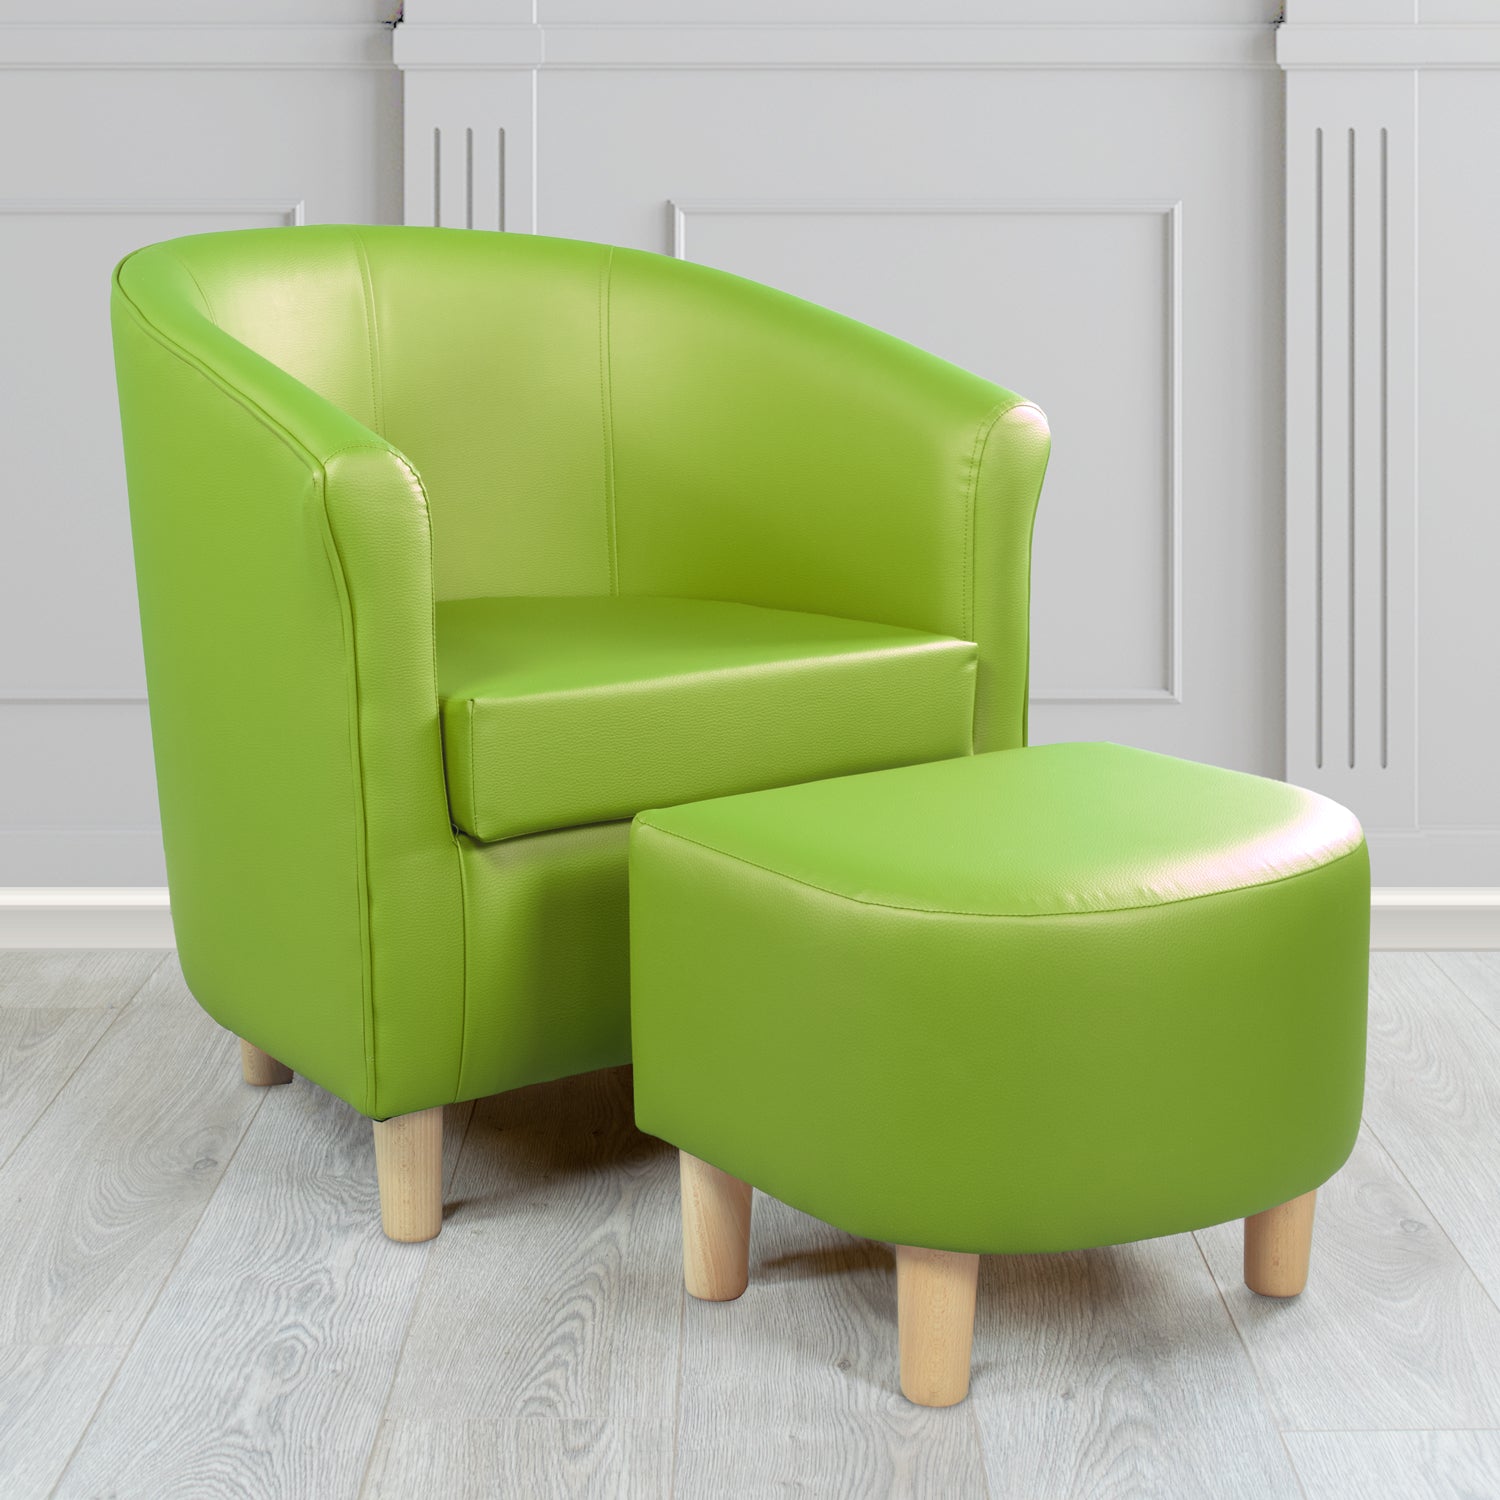 Tuscany Just Colour Citrus Green Faux Leather Tub Chair with Dee Footstool Set - The Tub Chair Shop